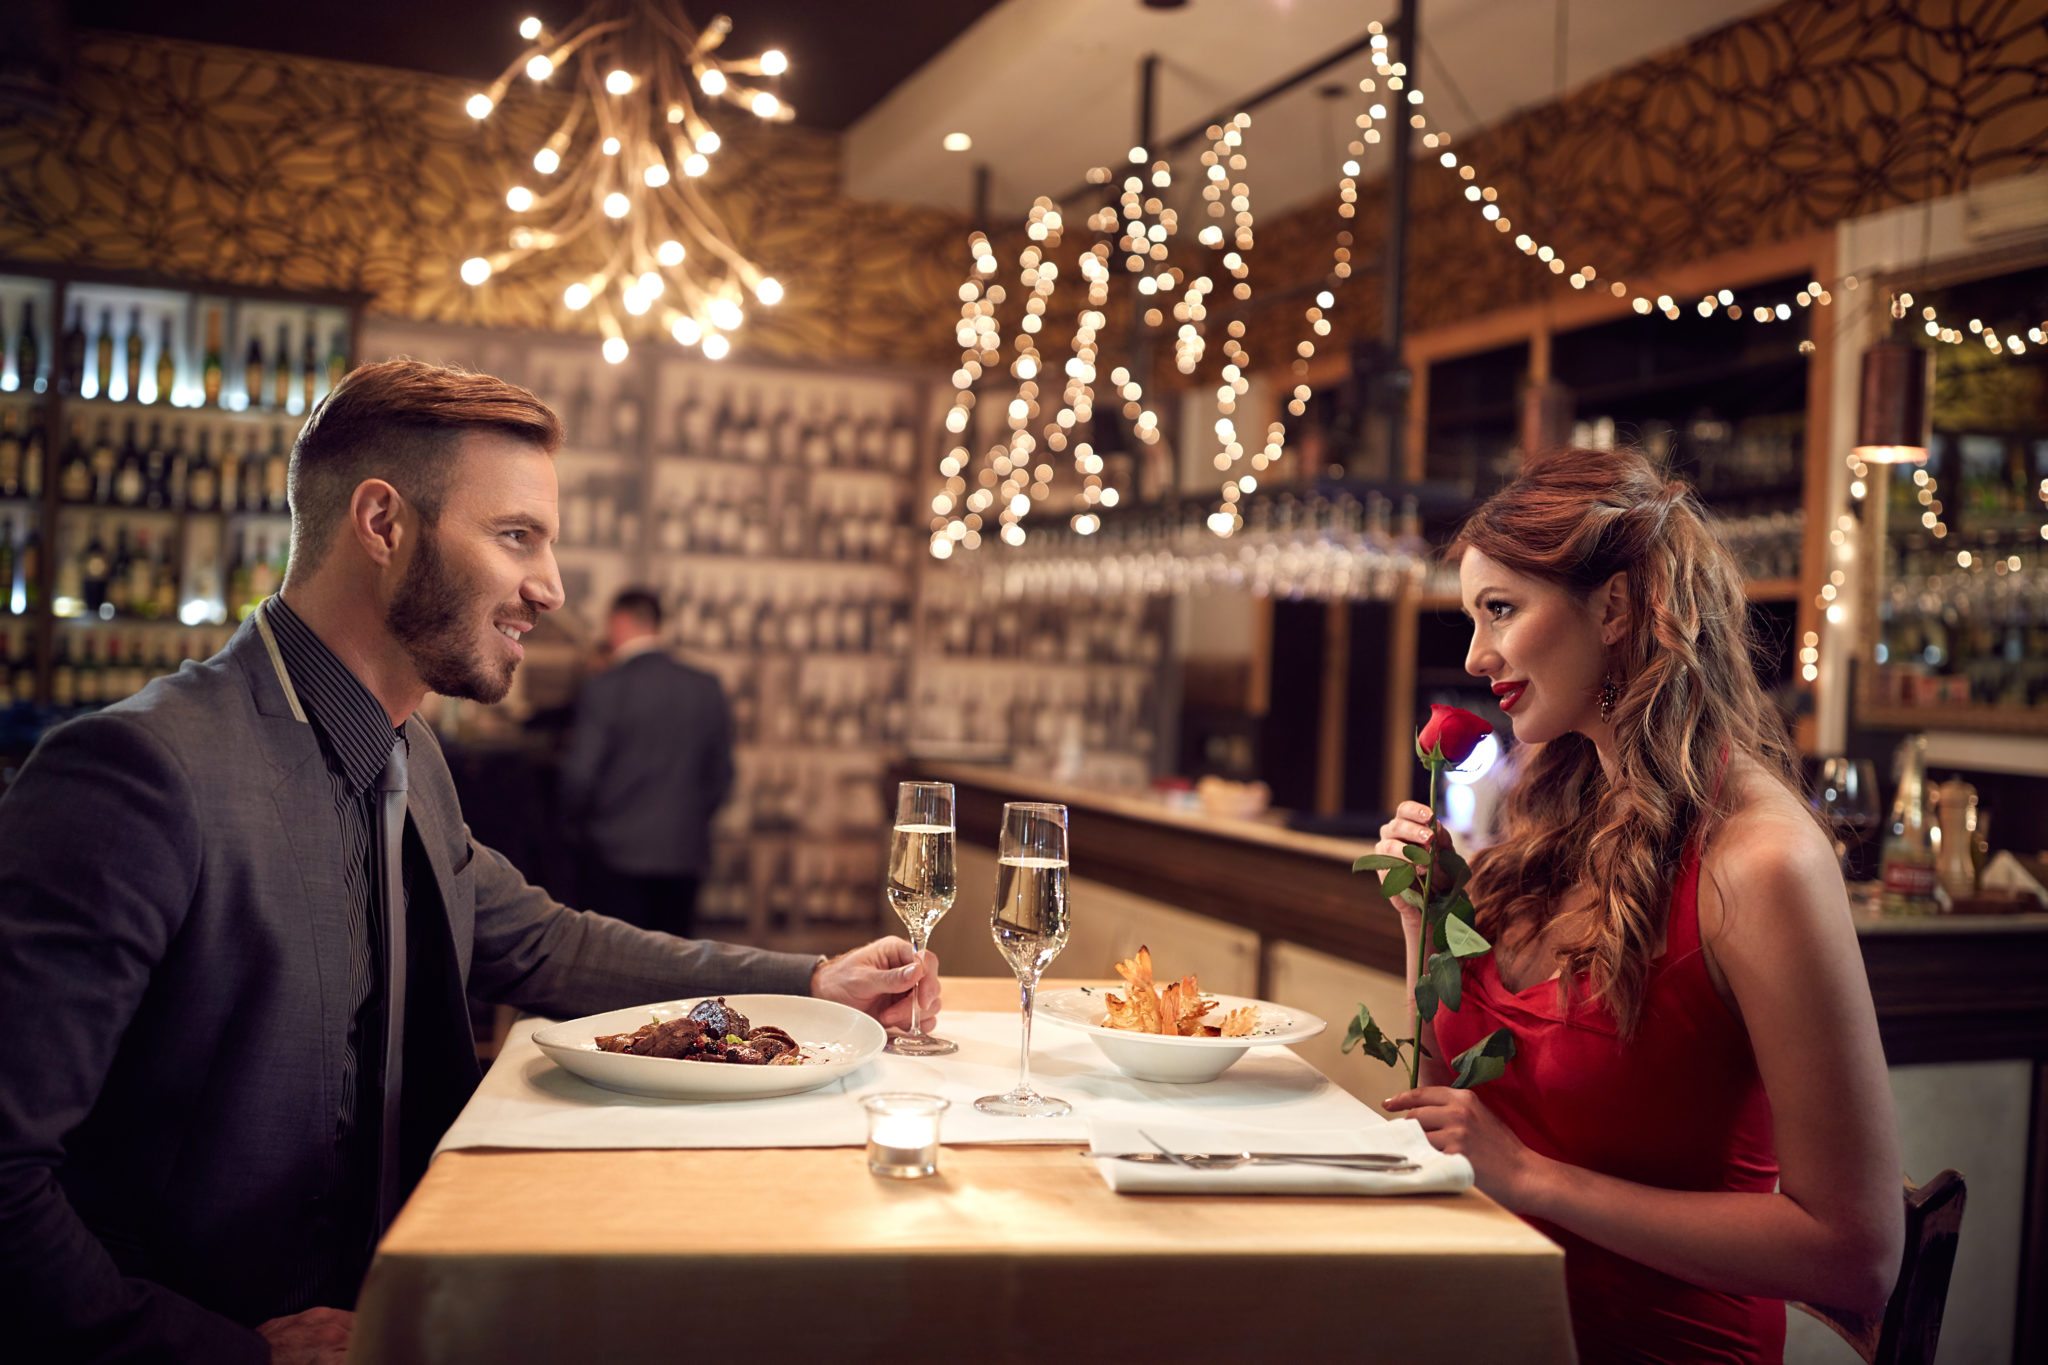 Places to Dine in Brickell on Valentine’s Day with Your Other Half